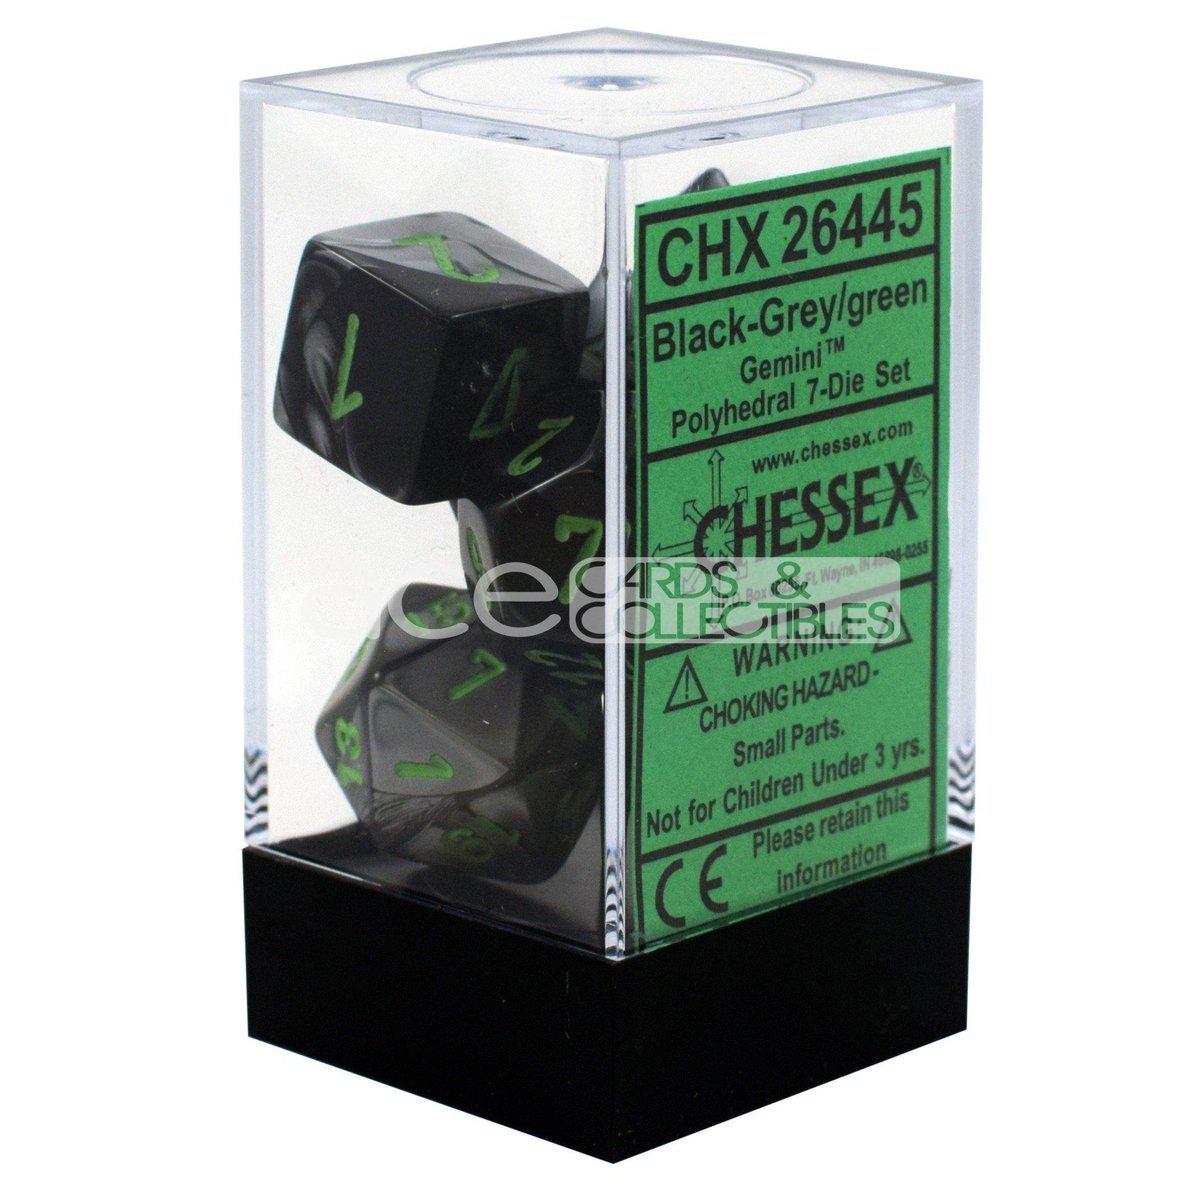 Chessex Gemini™ Polyhedral 7pcs Dice (Black-Grey/Green) [CHX26445]-Chessex-Ace Cards & Collectibles